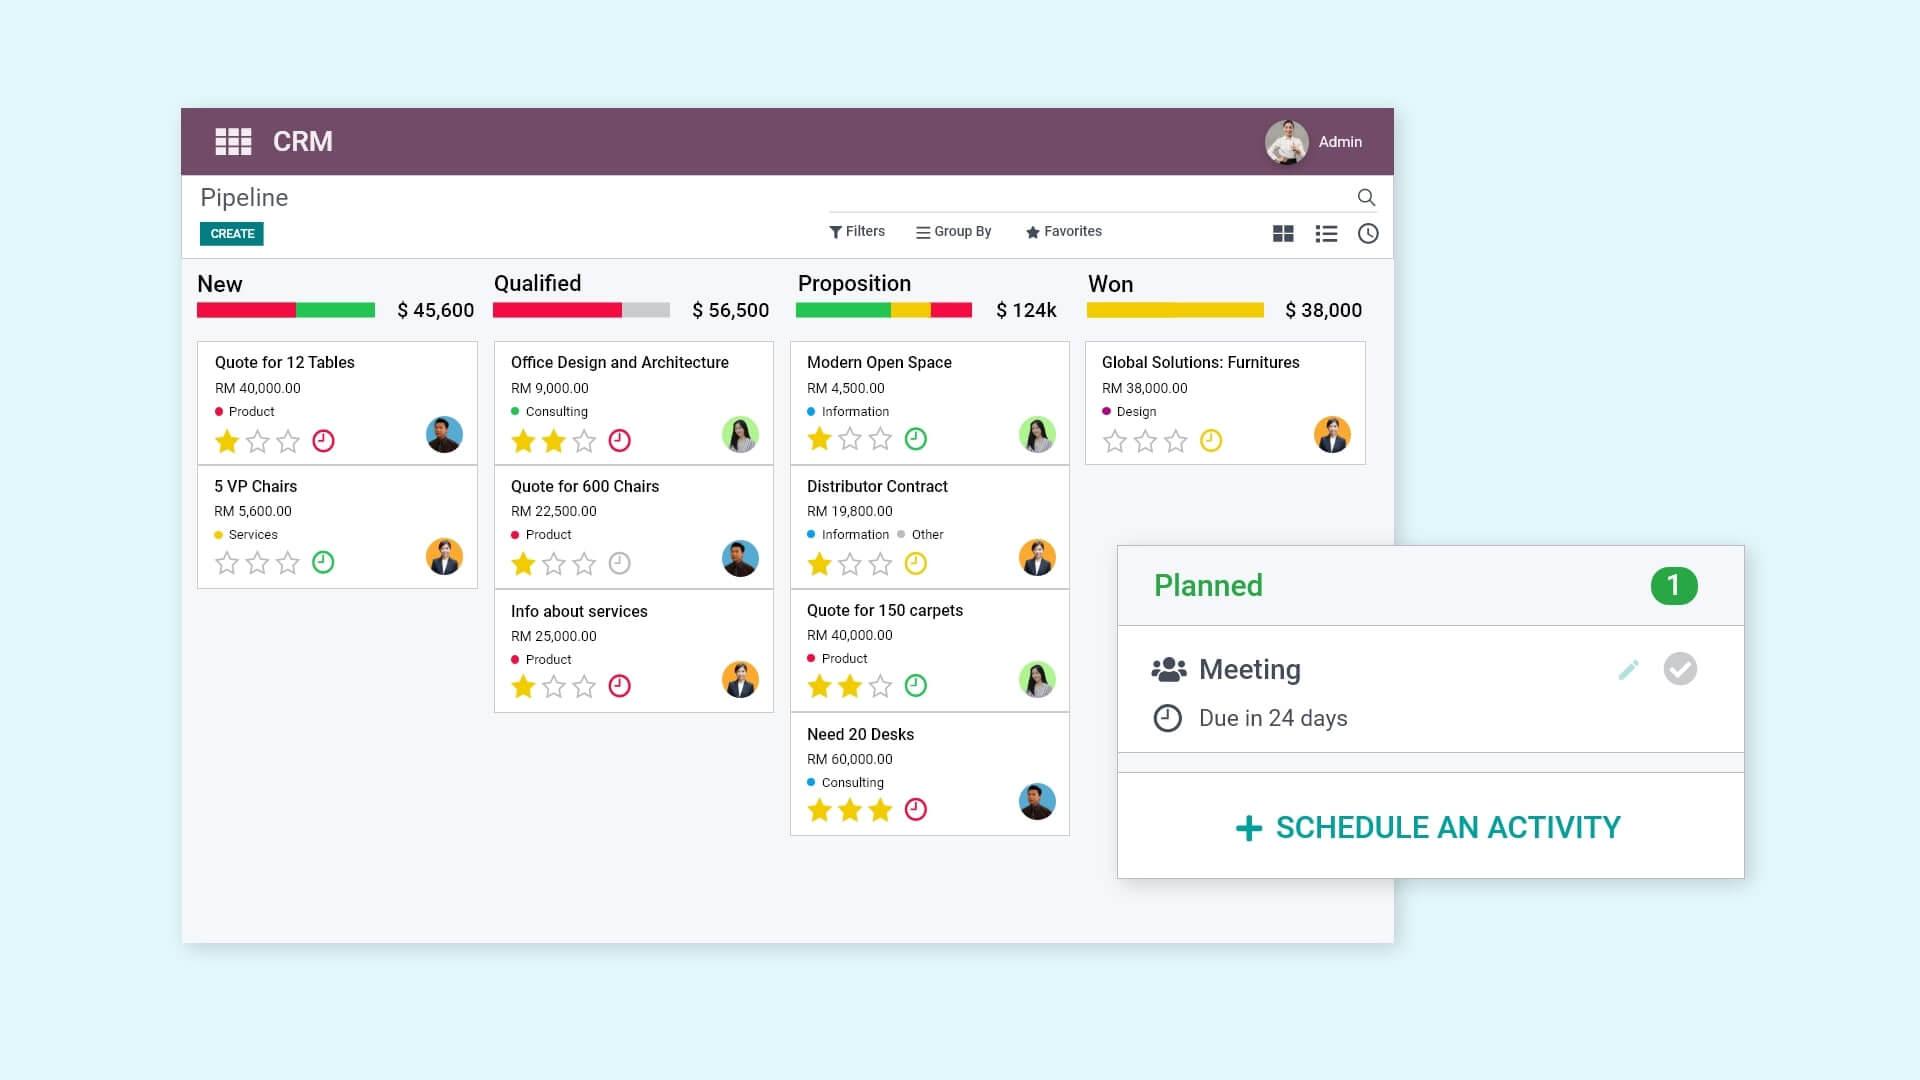 Odoo CRM helps Malaysian businesses organize sales activities and sales teams. Odoo CRM is great for tracking leads, get accurate forecasts, and manage customer data.